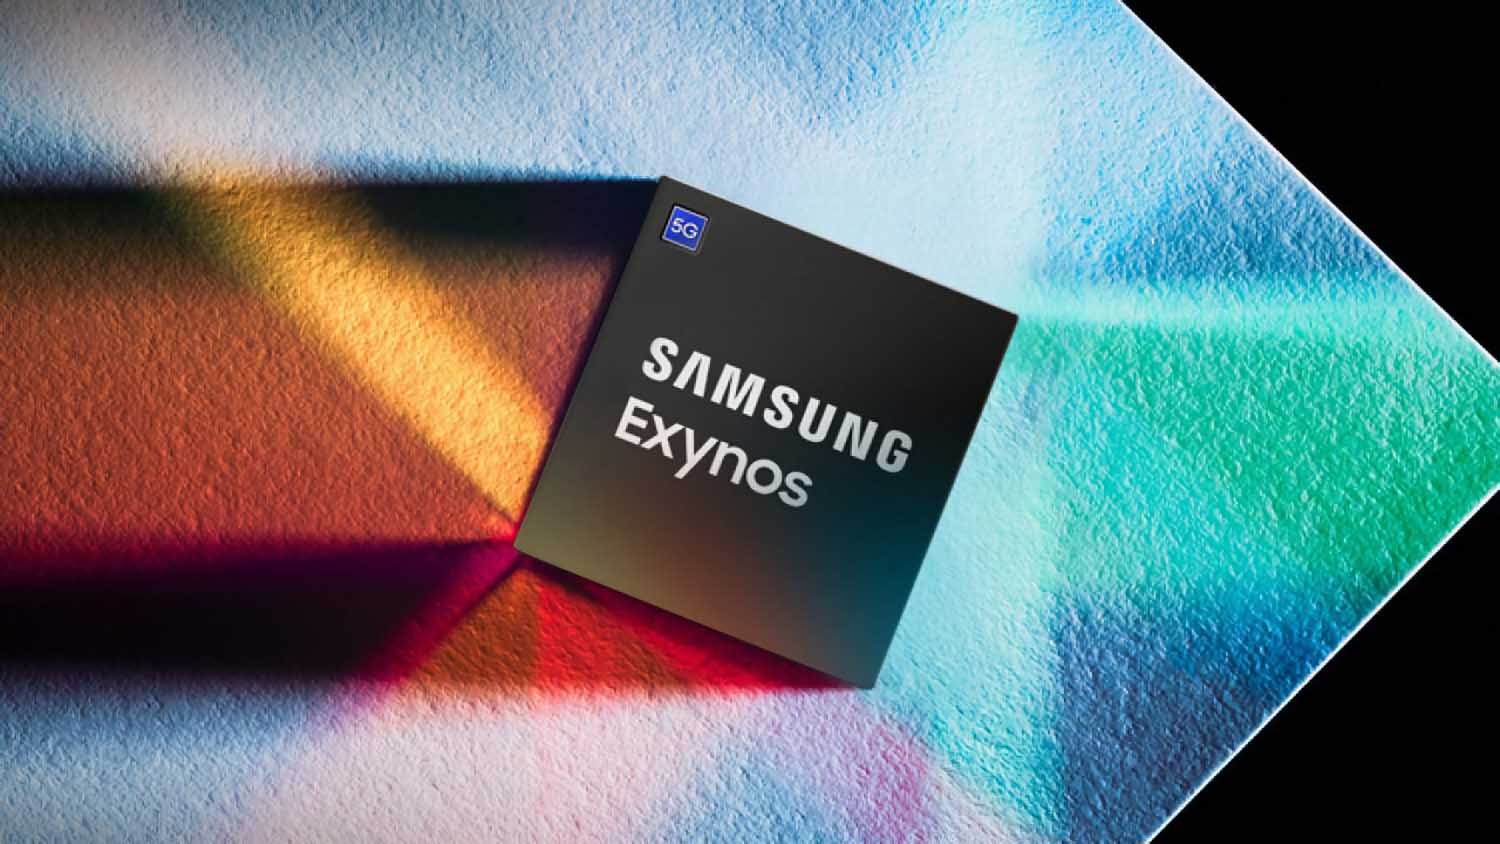 Samsung has denied rumors about the cessation of production of Exynos chips. The company is working on a premium processor for the Galaxy S